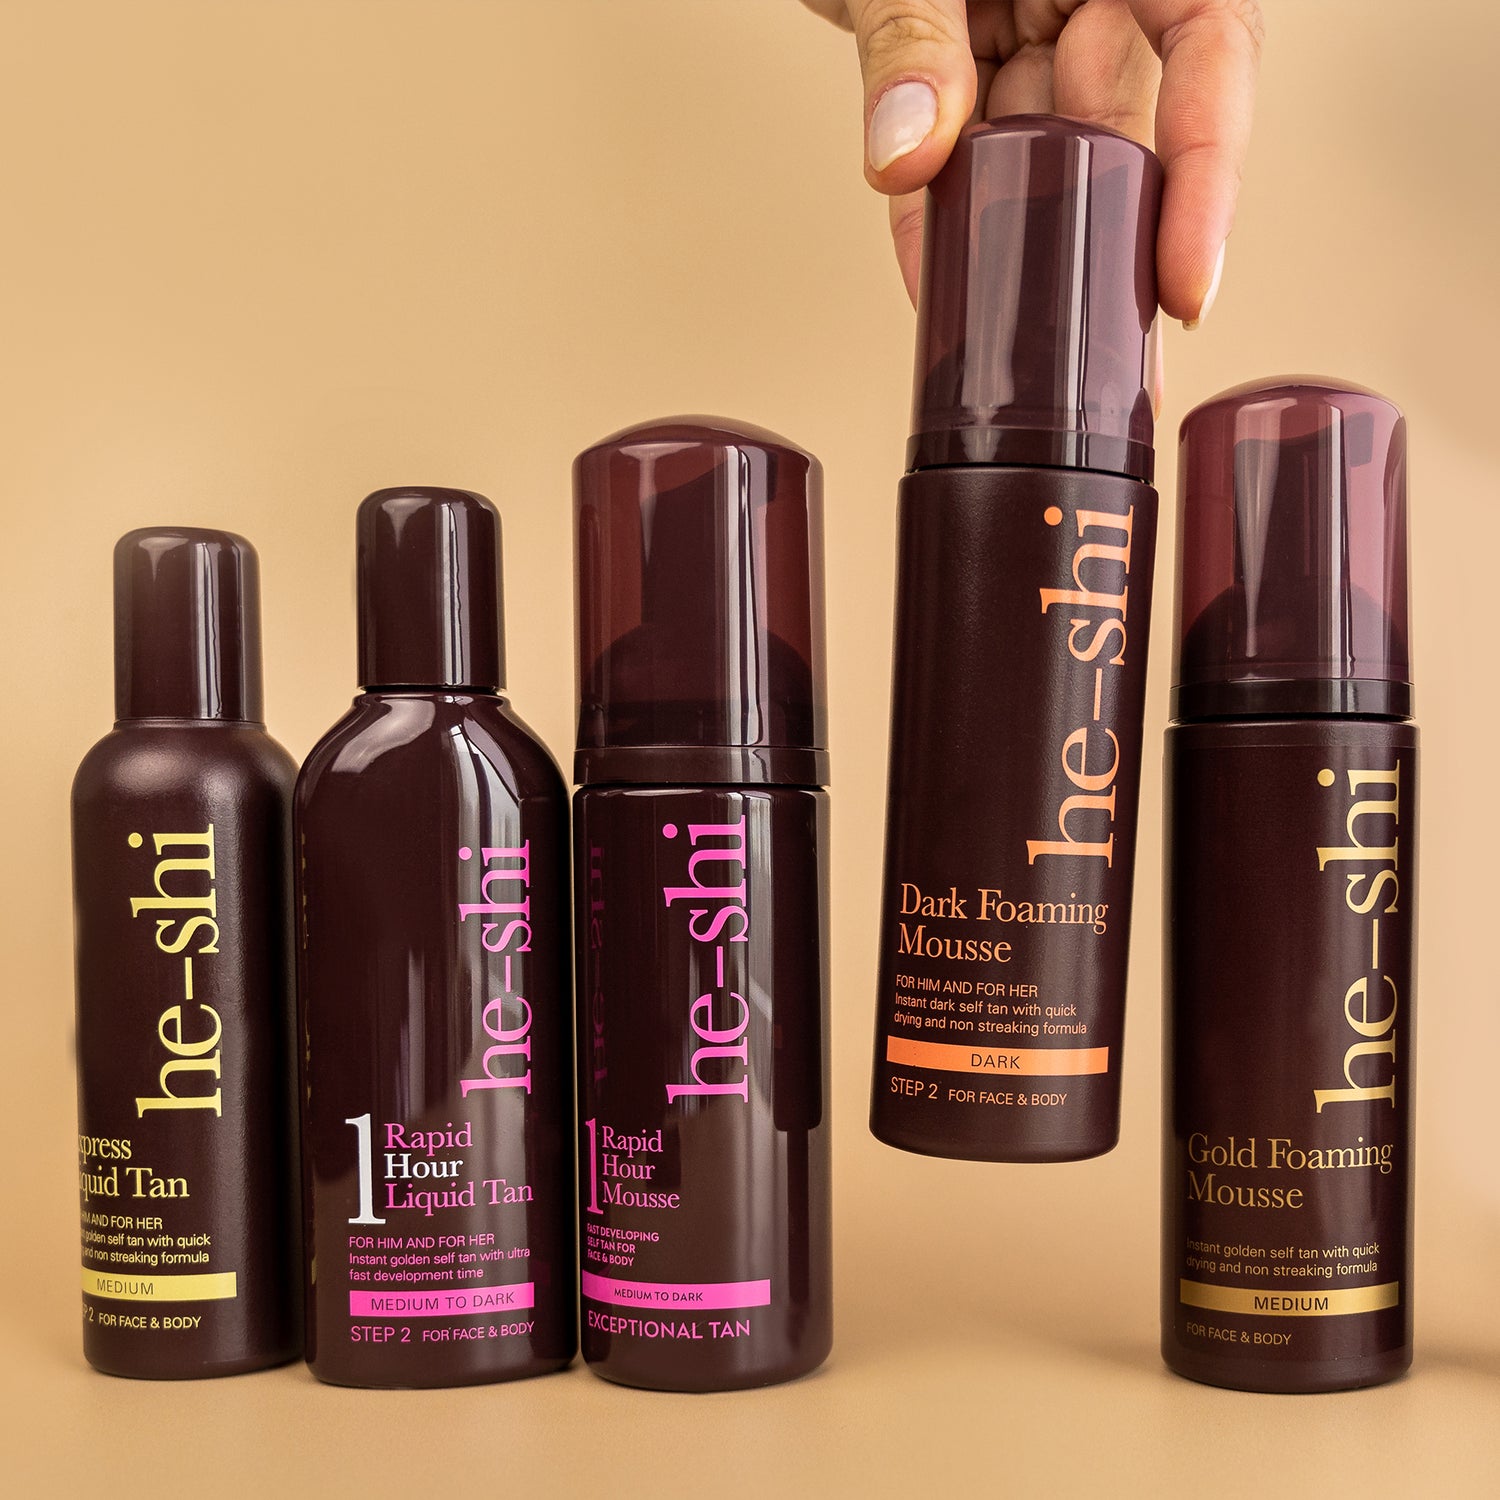 Full He-Shi range of products